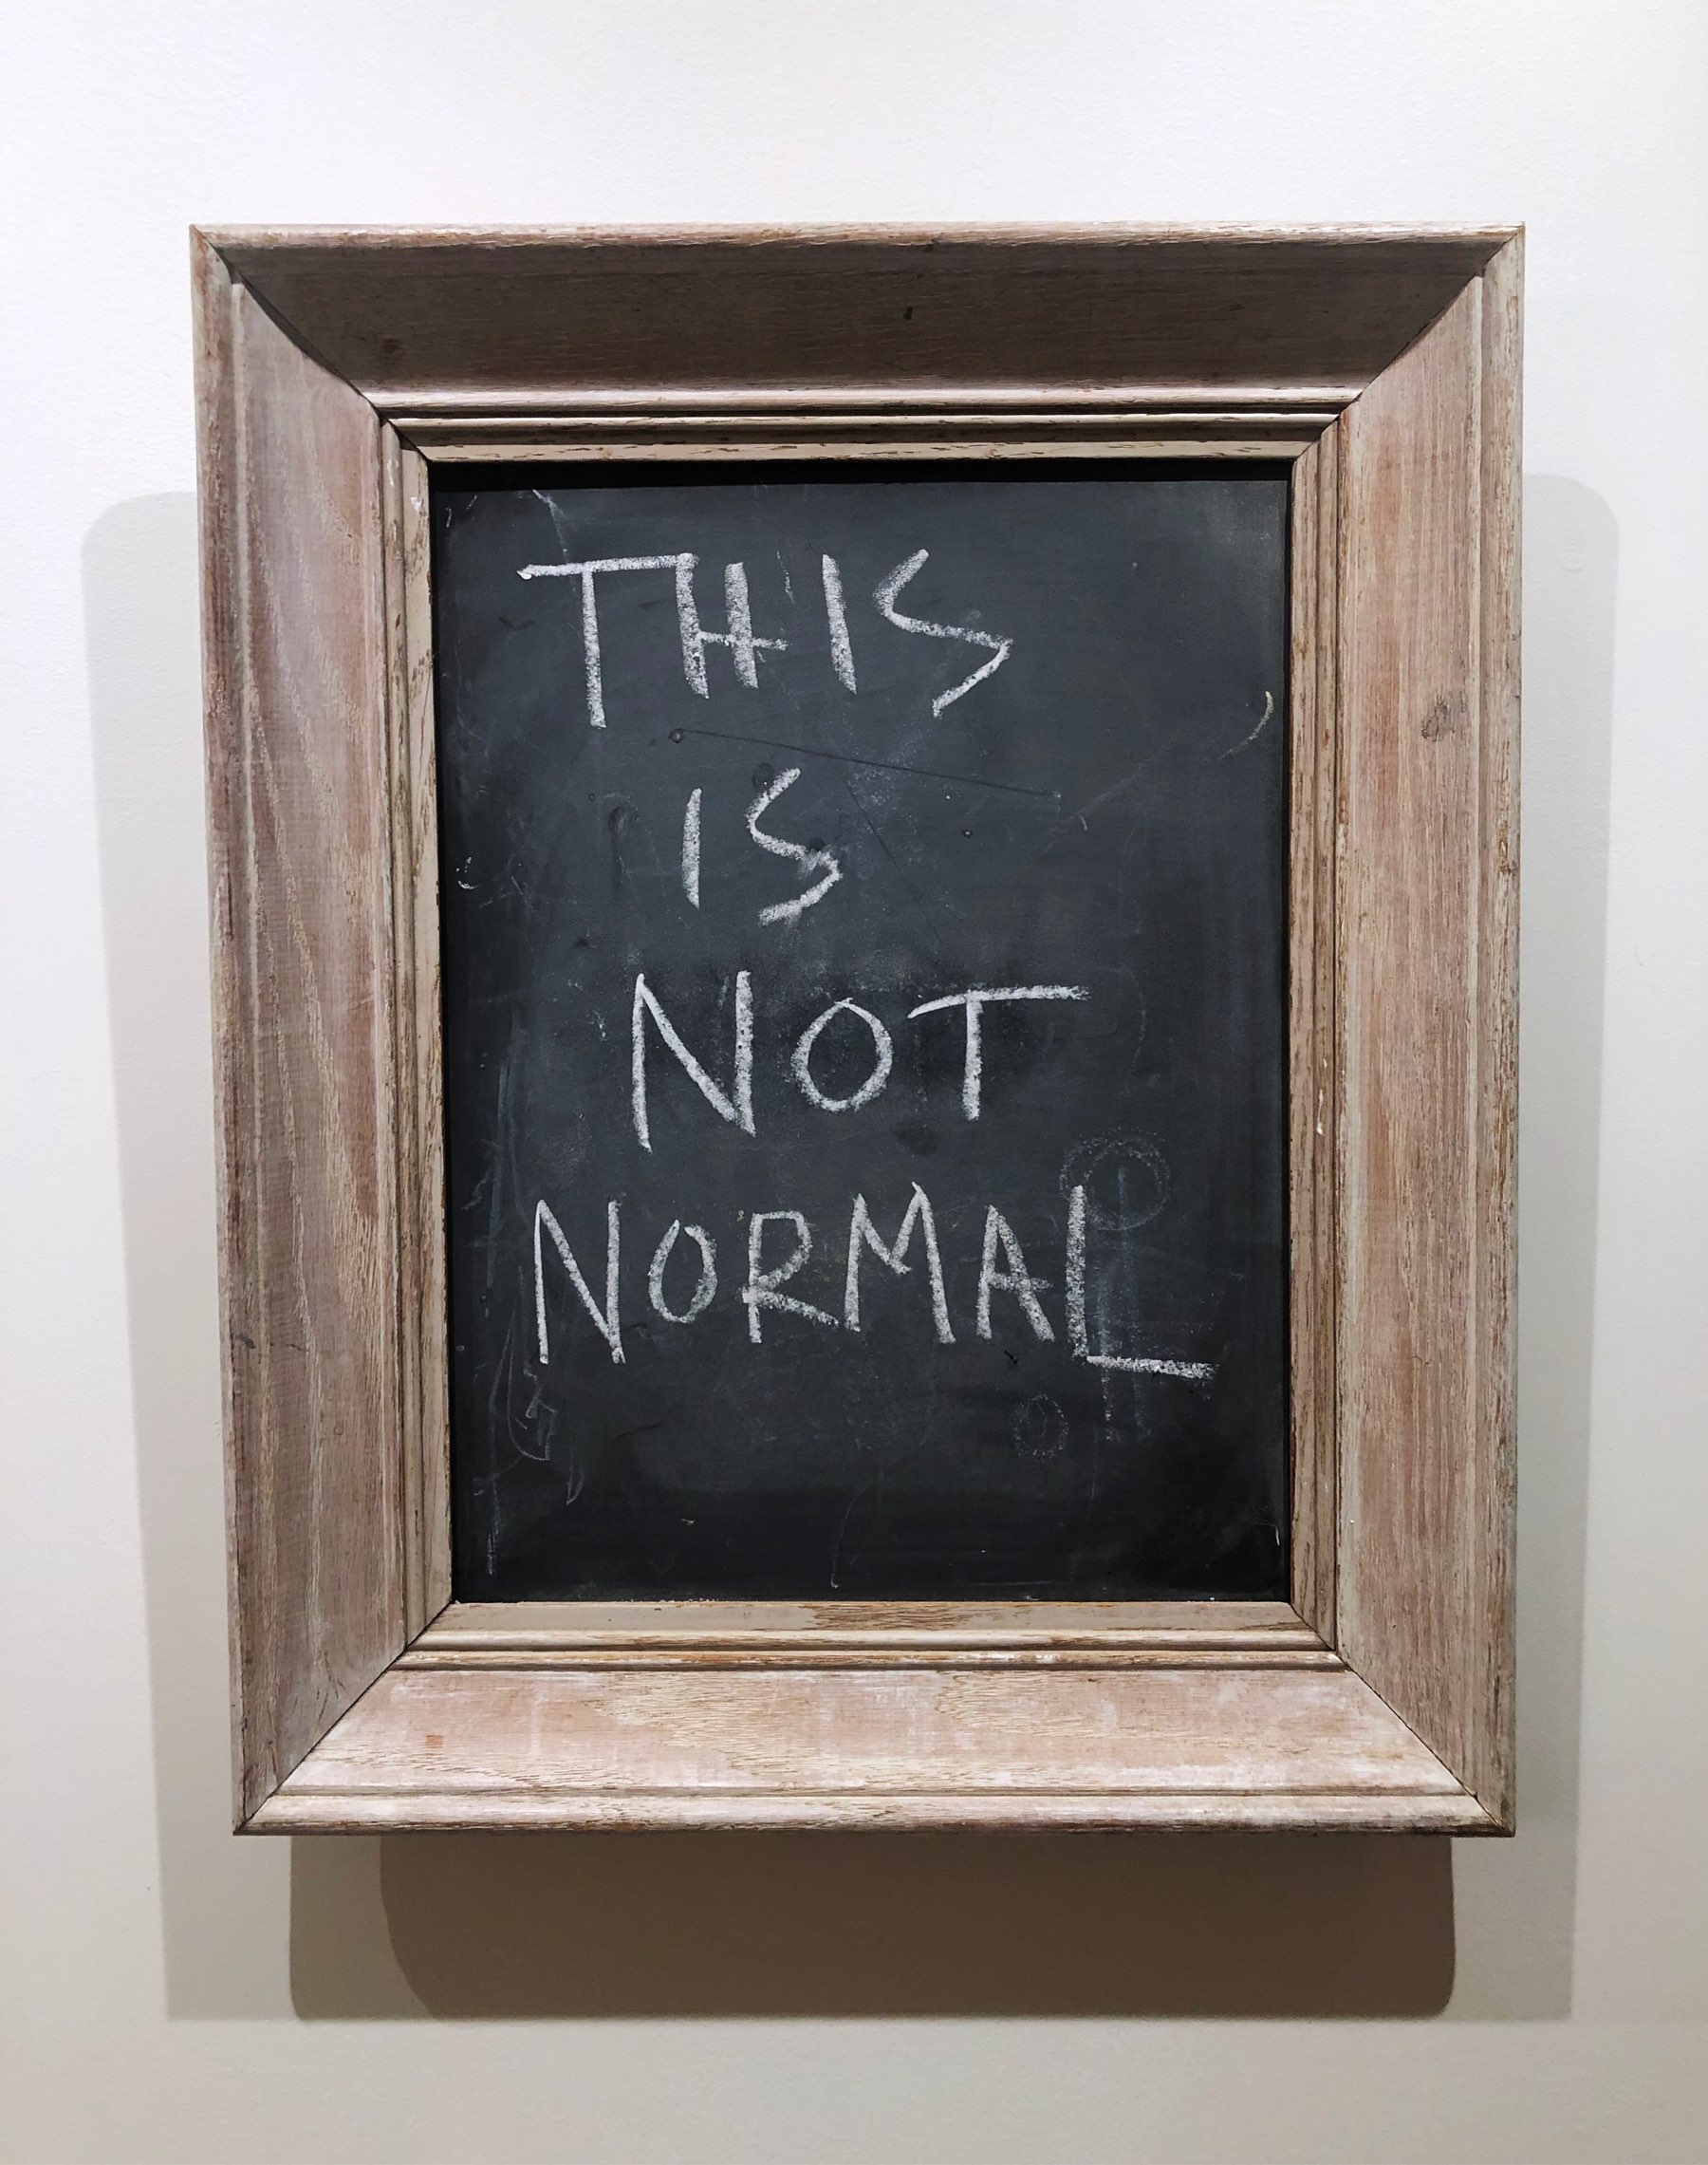 Chalkboard that reads “This is not normal”.